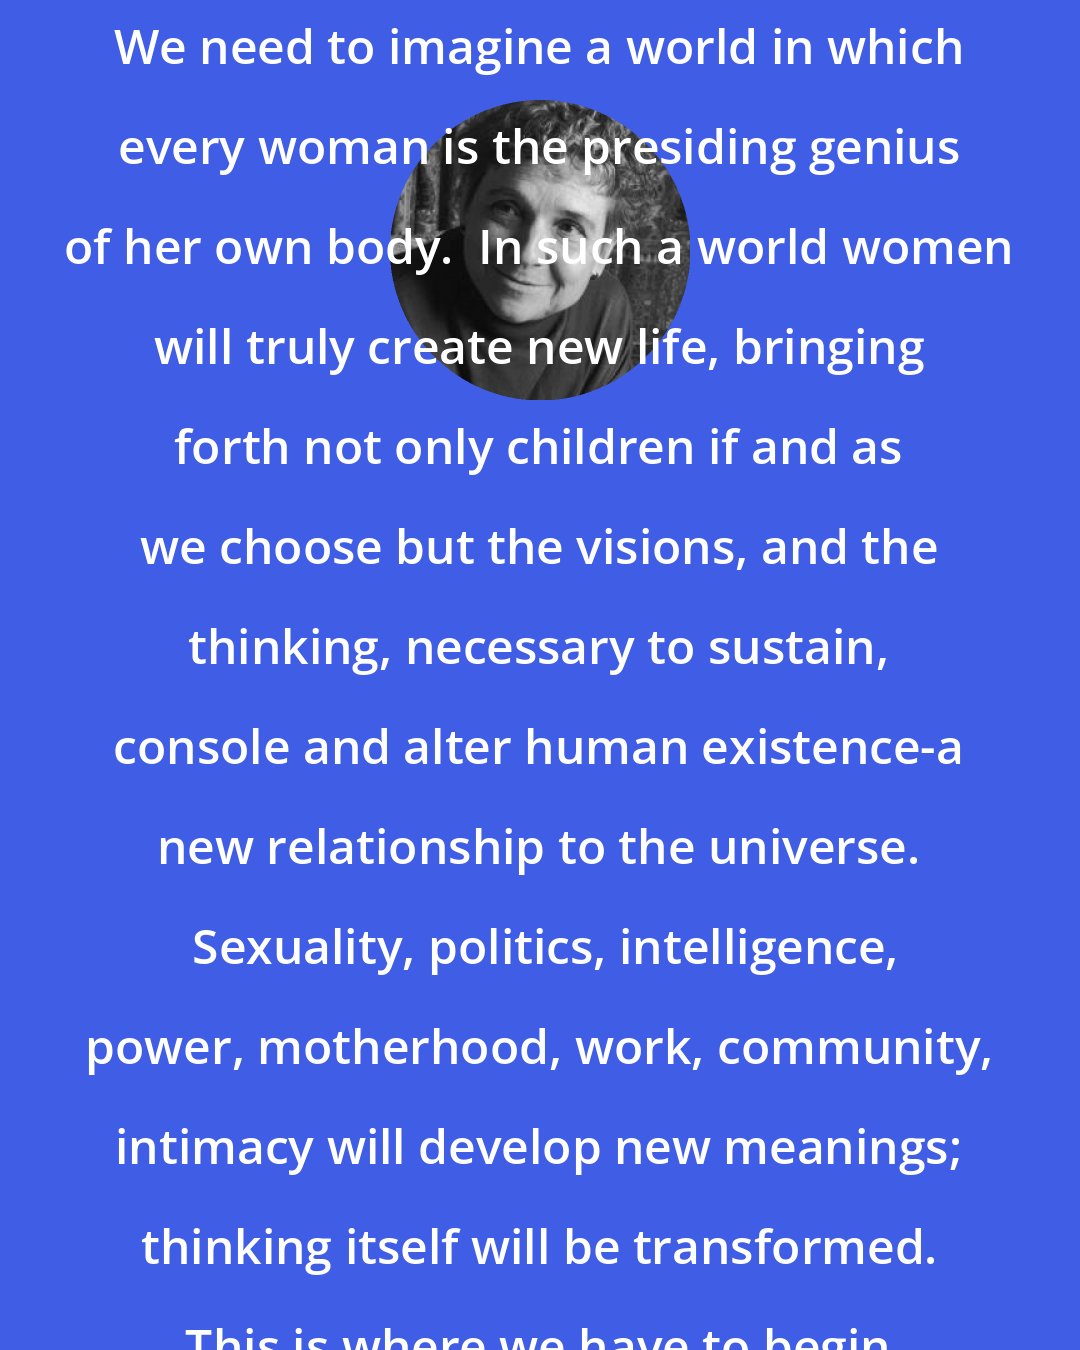 Adrienne Rich: We need to imagine a world in which every woman is the presiding genius of her own body.  In such a world women will truly create new life, bringing forth not only children if and as we choose but the visions, and the thinking, necessary to sustain, console and alter human existence-a new relationship to the universe.  Sexuality, politics, intelligence, power, motherhood, work, community, intimacy will develop new meanings; thinking itself will be transformed.  This is where we have to begin.